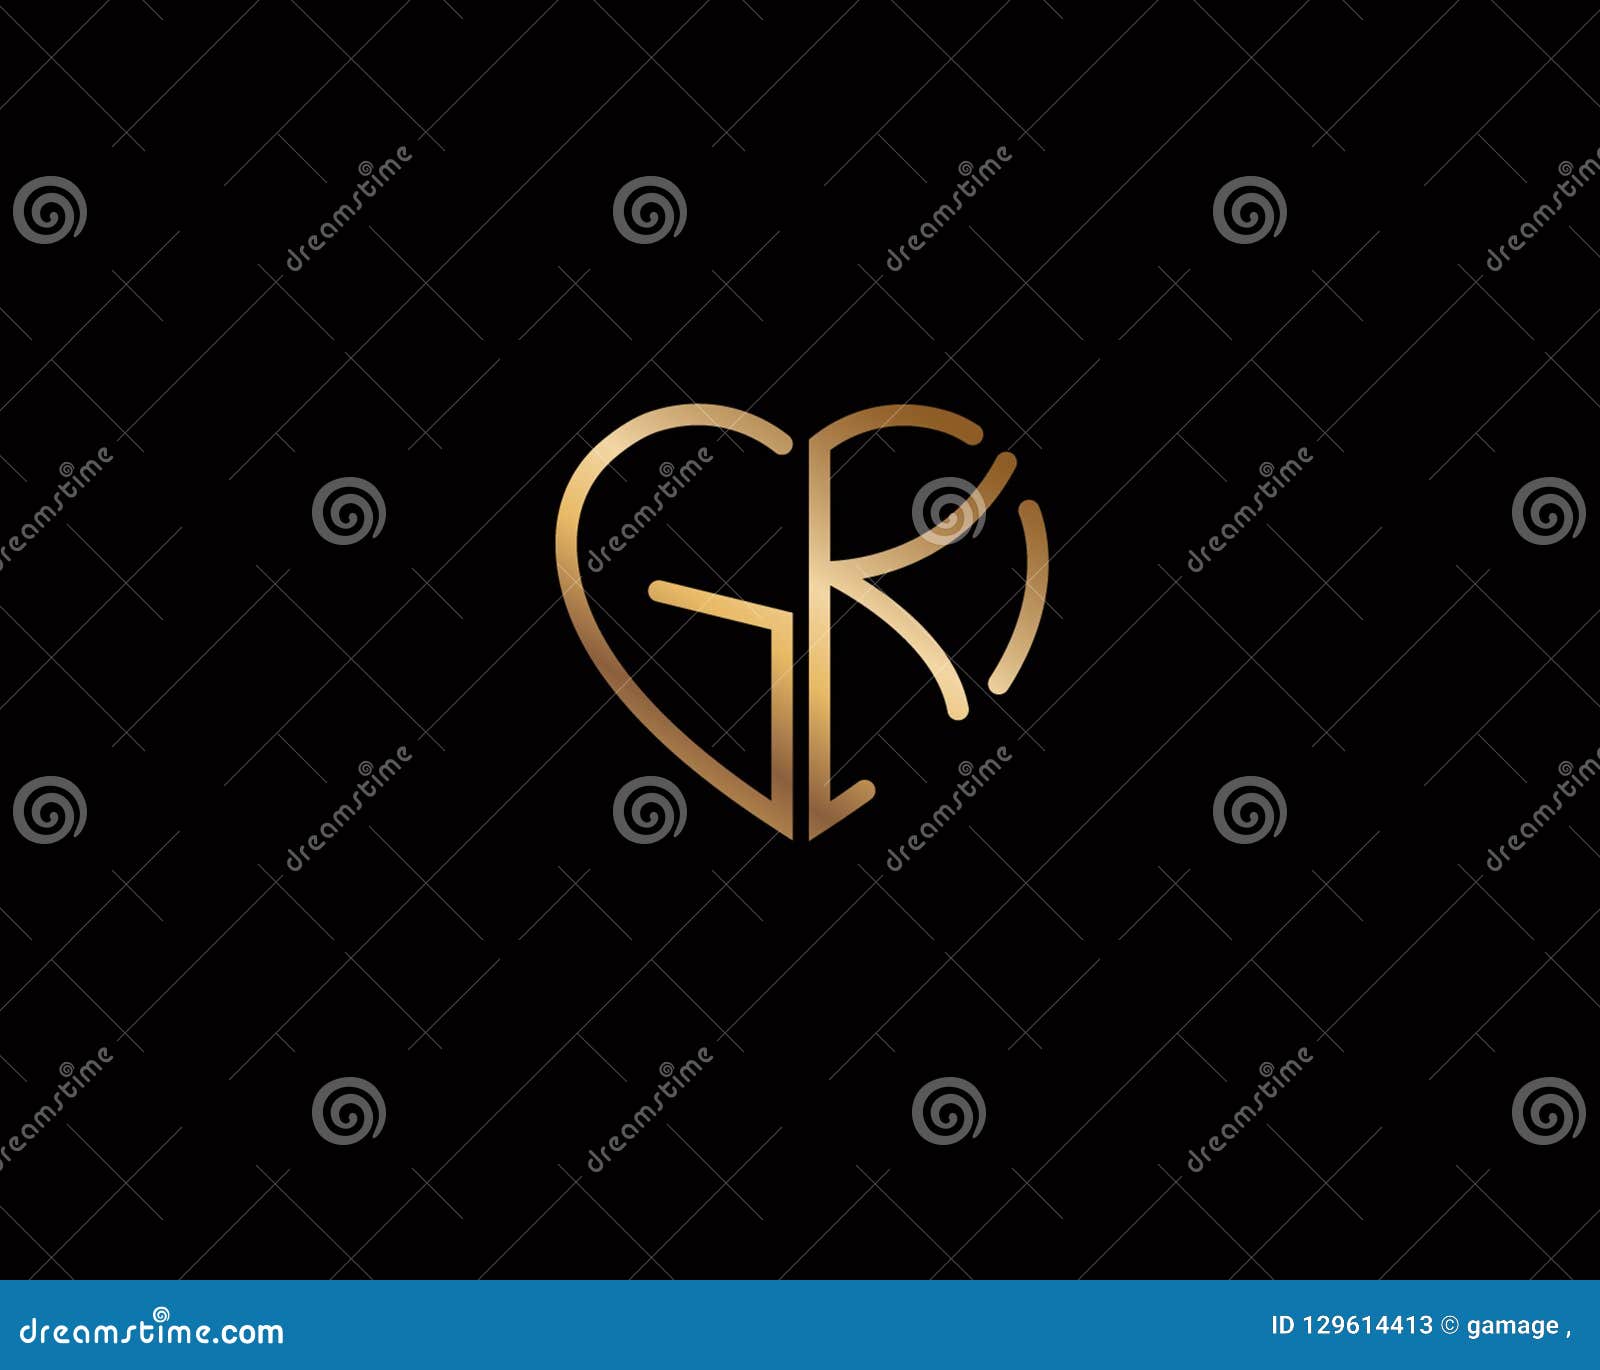 Gk Initial Heart Shape Gold Colored Logo Stock Vector